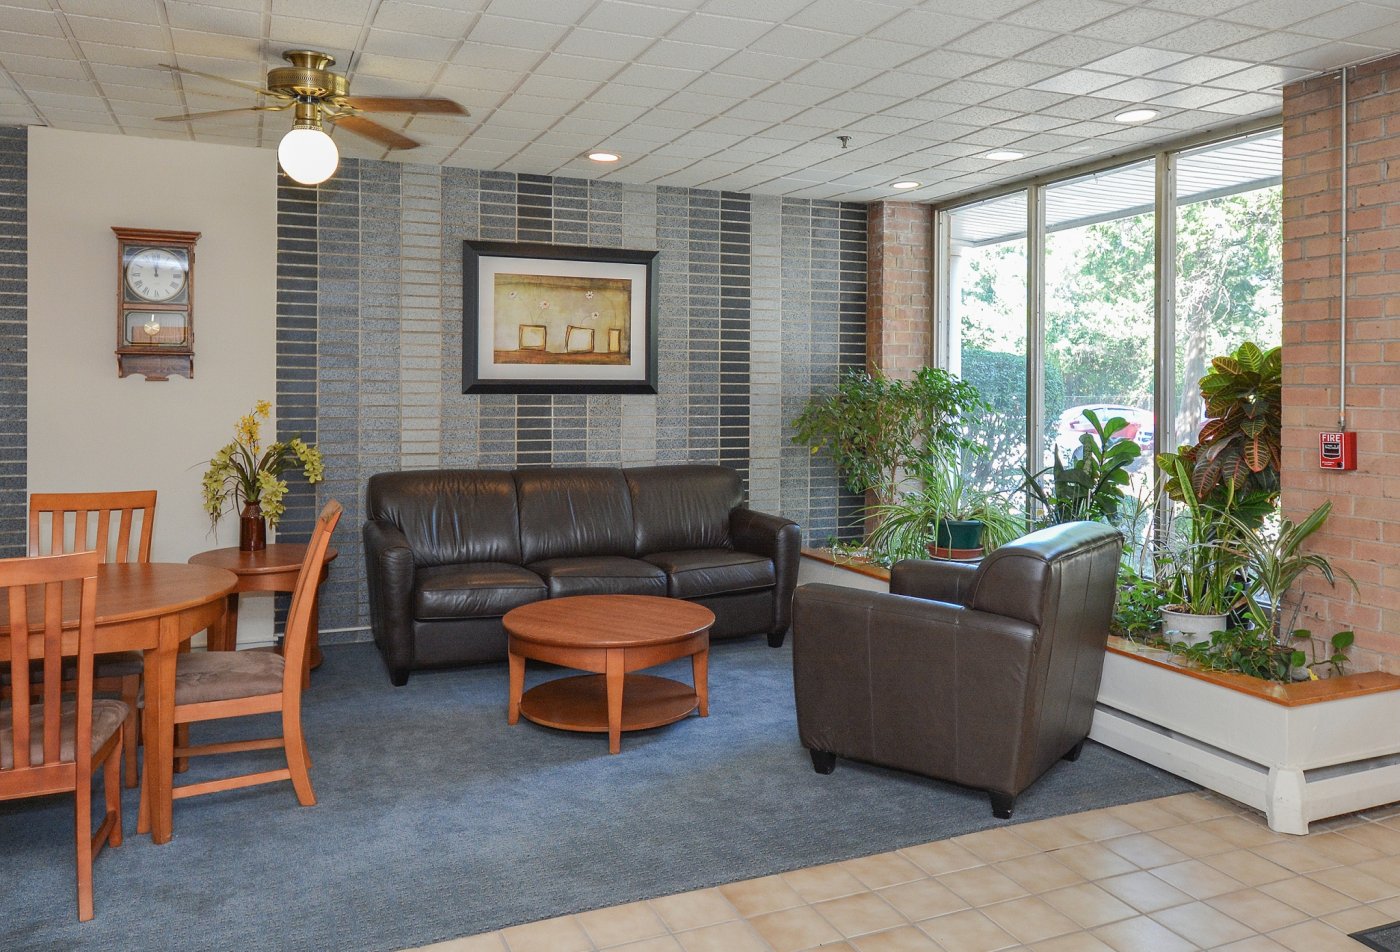 Spacious Living Room | Apartments in East Norriton, PA | Norriton East Apartments